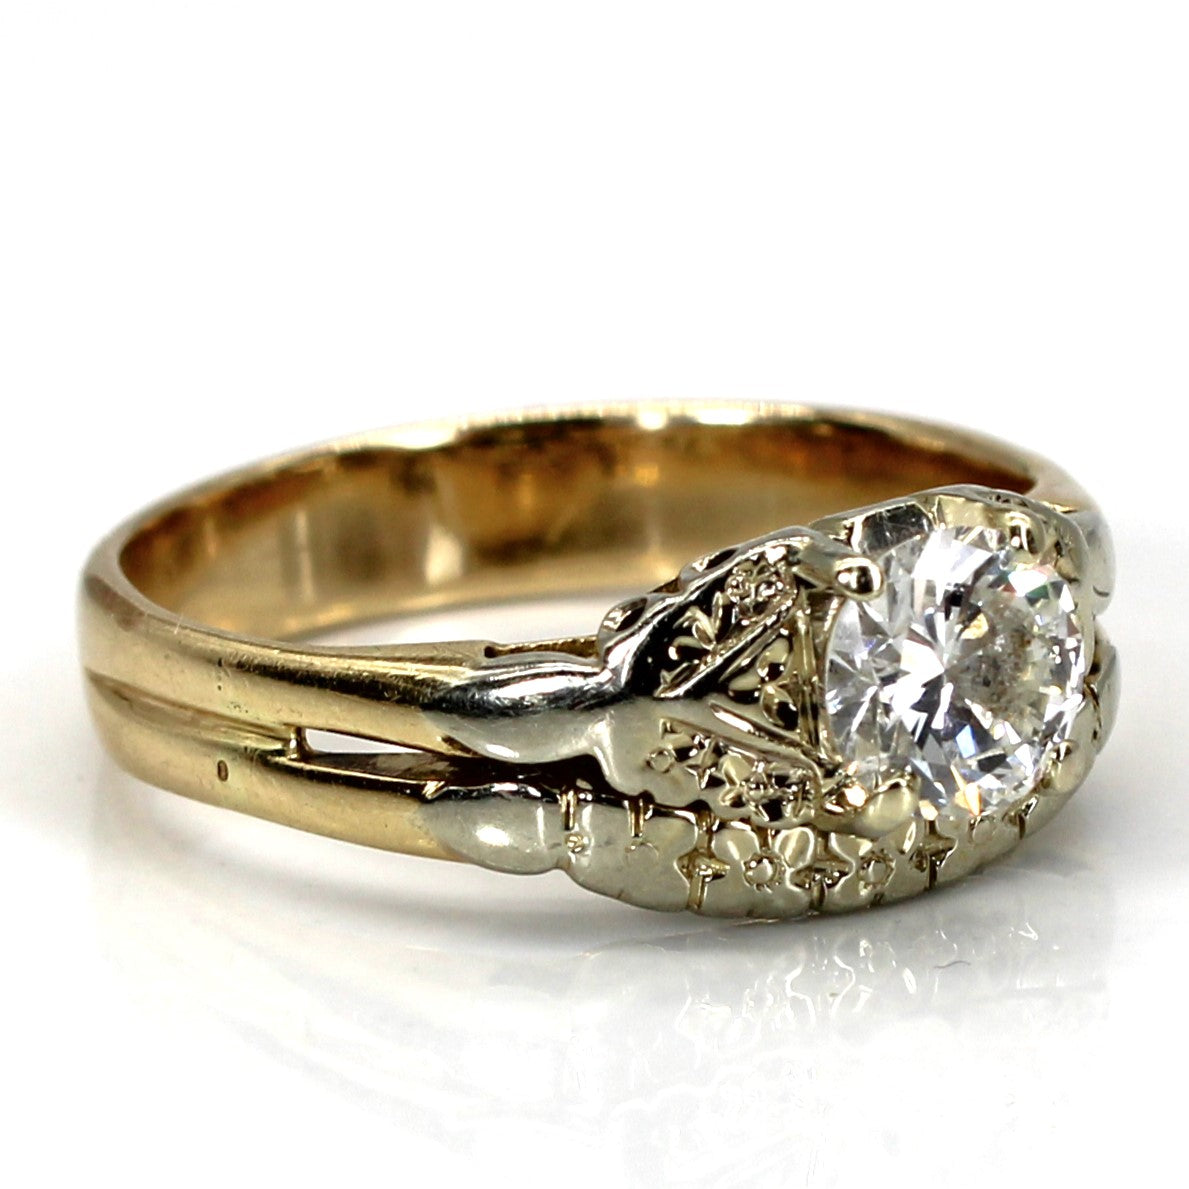 Solitaire Diamond Soldered Gold Ring | 0.67ct VS1 G/H | SZ 8.5 |